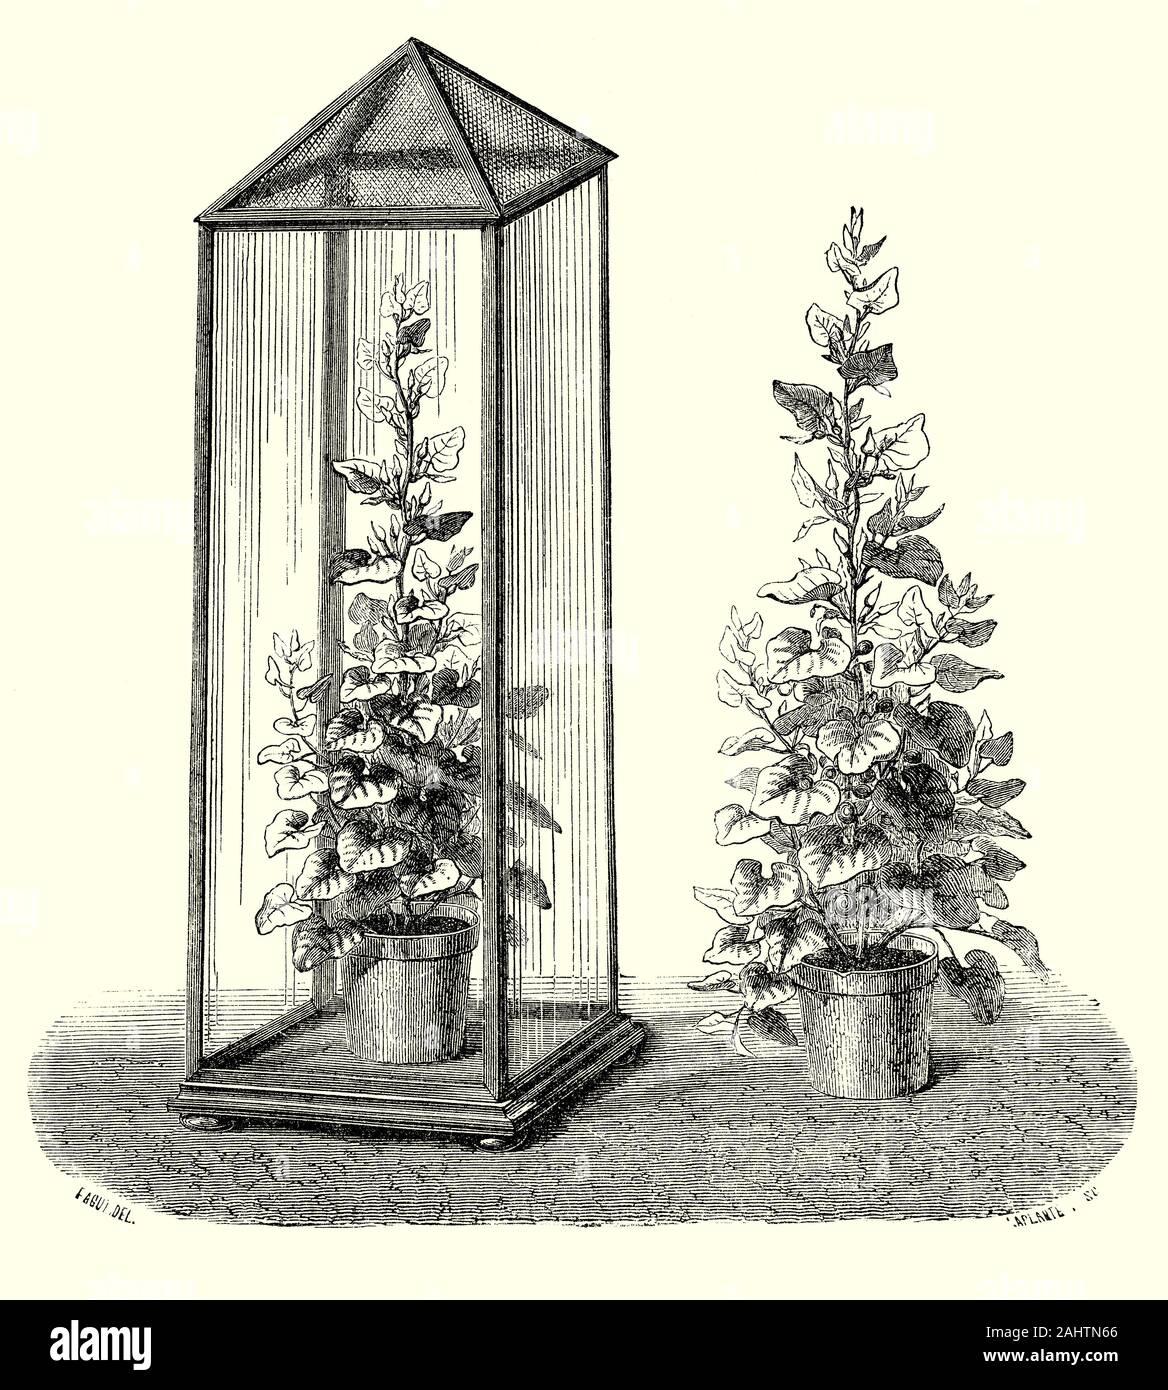 An experiment on Birthwort (Aristolochia clematitis), to show the influence of insects upon the fecundity of flowers by Carl Ludwig Willdenow (1765-1812), a German botanist, pharmacist, and plant taxonomist. He is considered one of the founders of phytogeography, the study of the geographic distribution of plants and was a major influence to Christian Konrad Sprengel, who pioneered the study of plant pollination and floral biology. Stock Photo